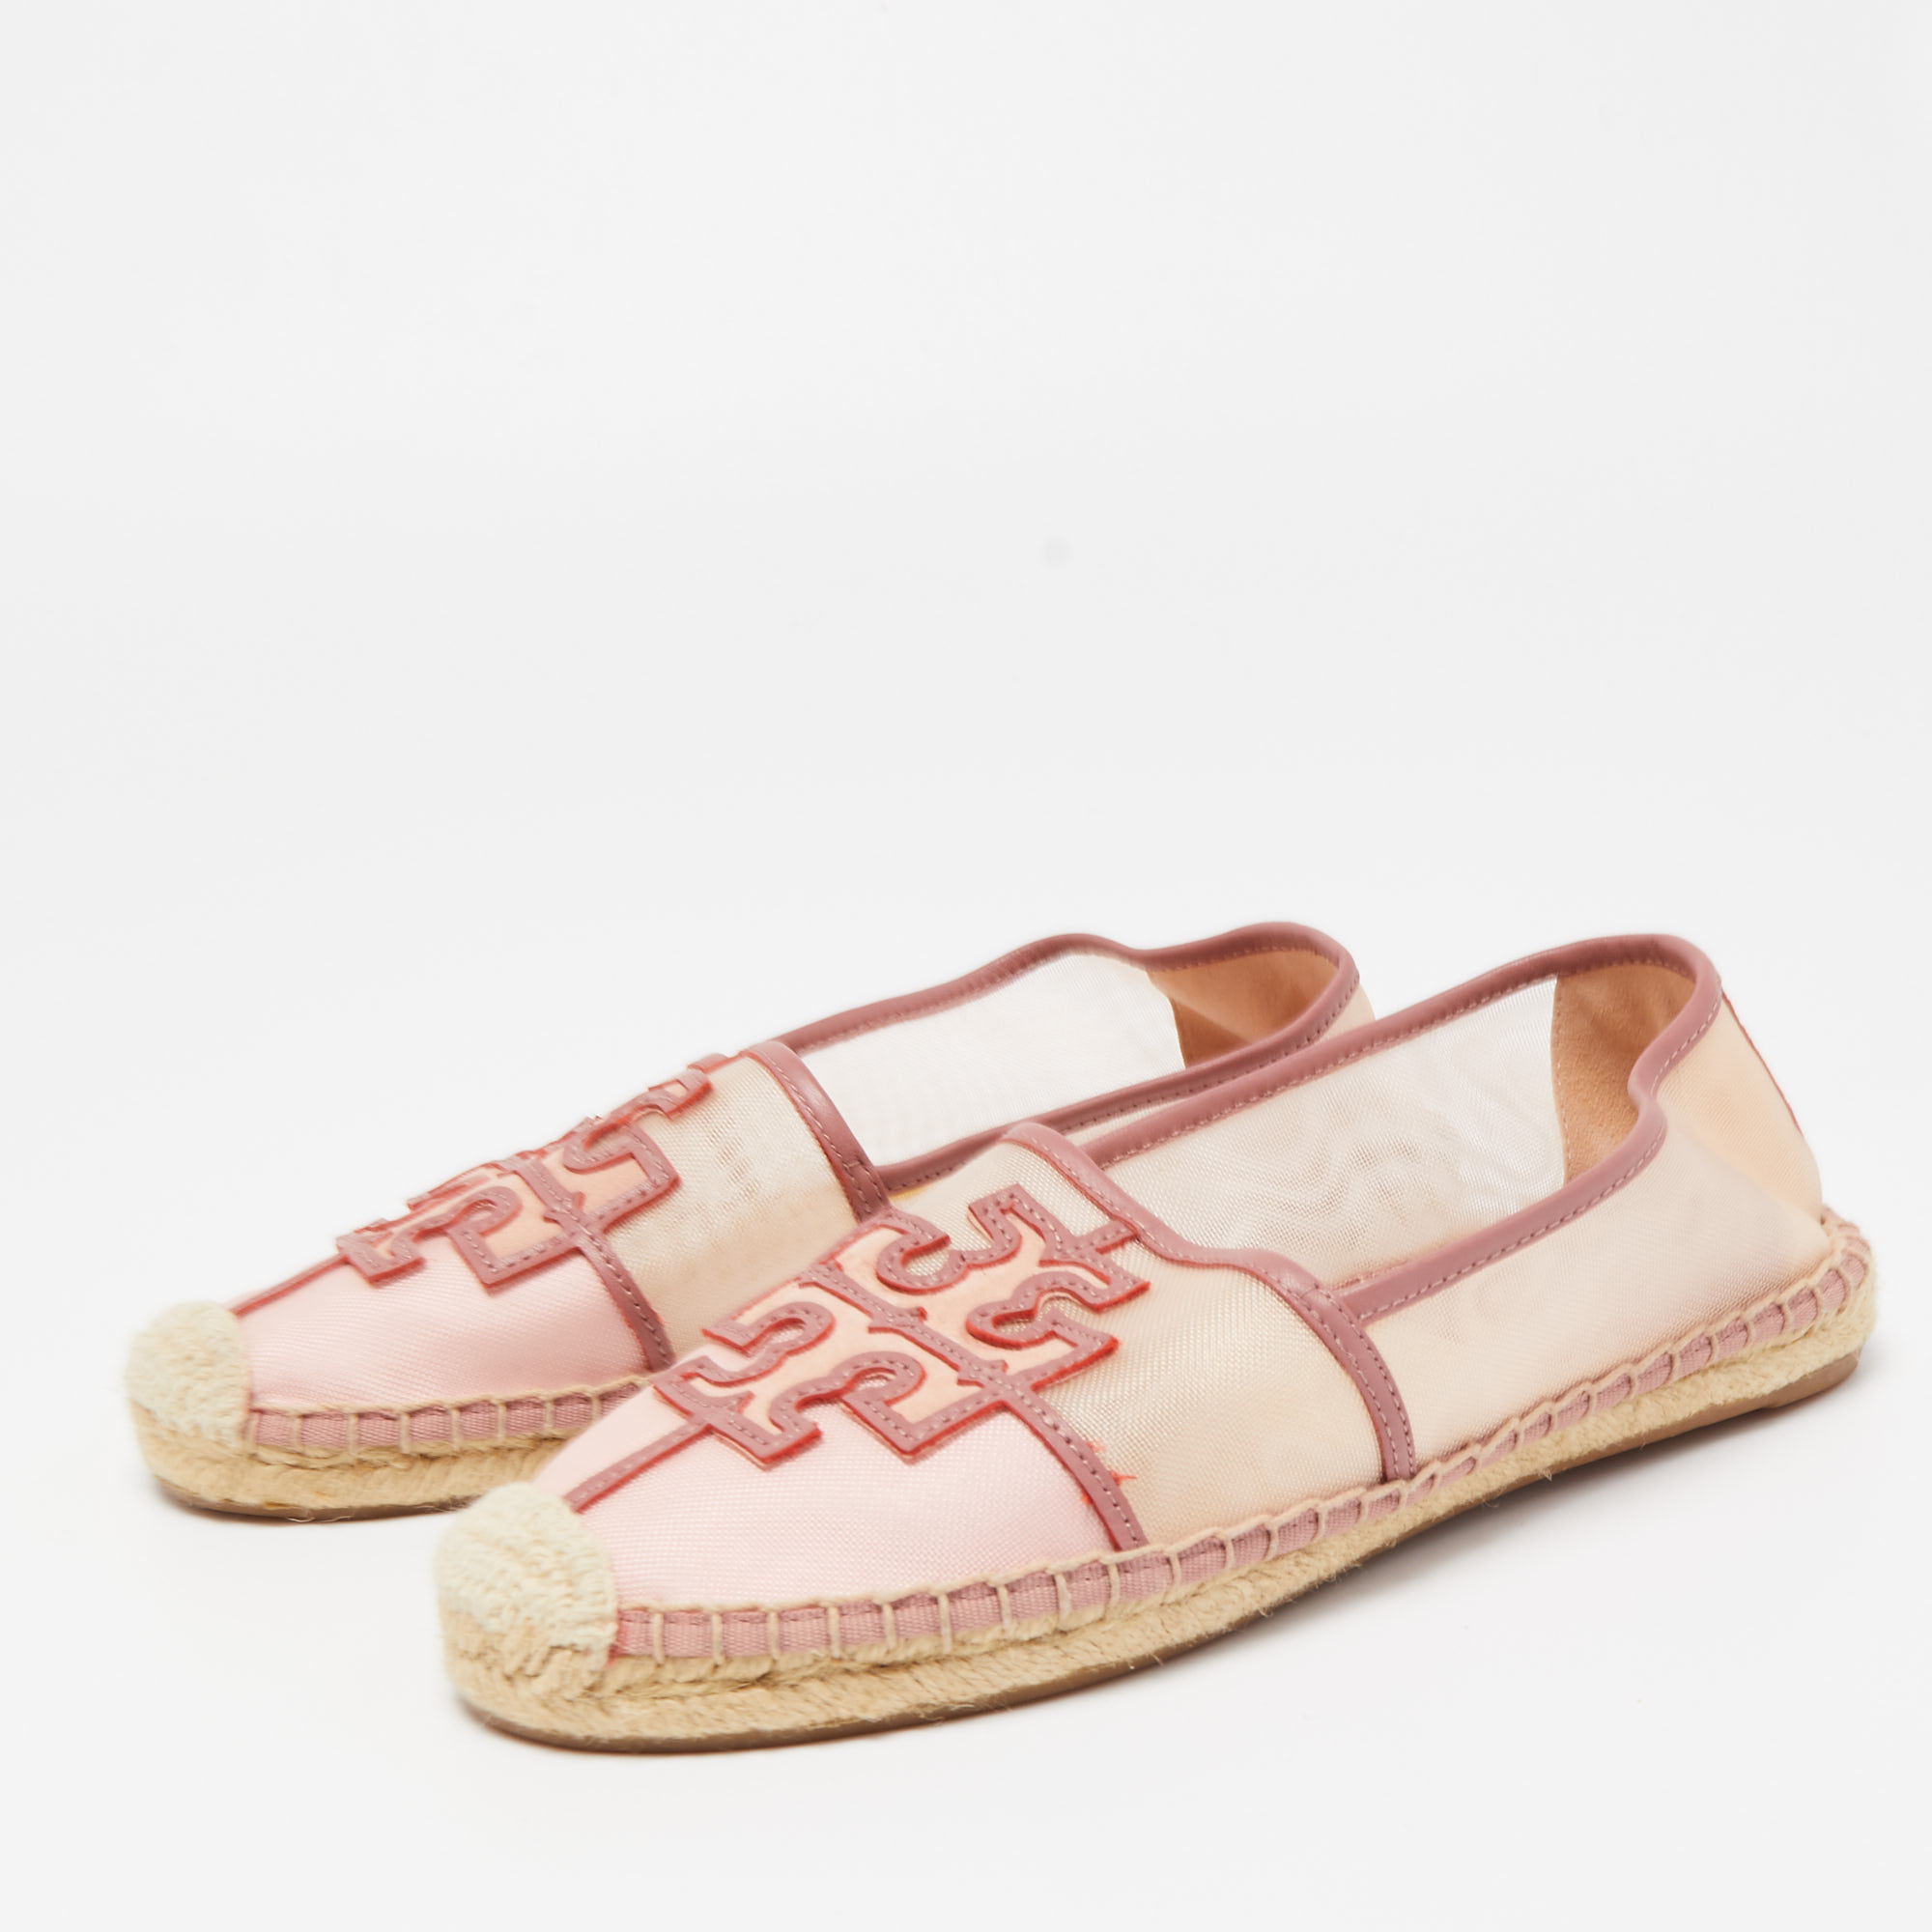 

Tory Burch Pink Mesh and Leather Espadrilles Flats Size